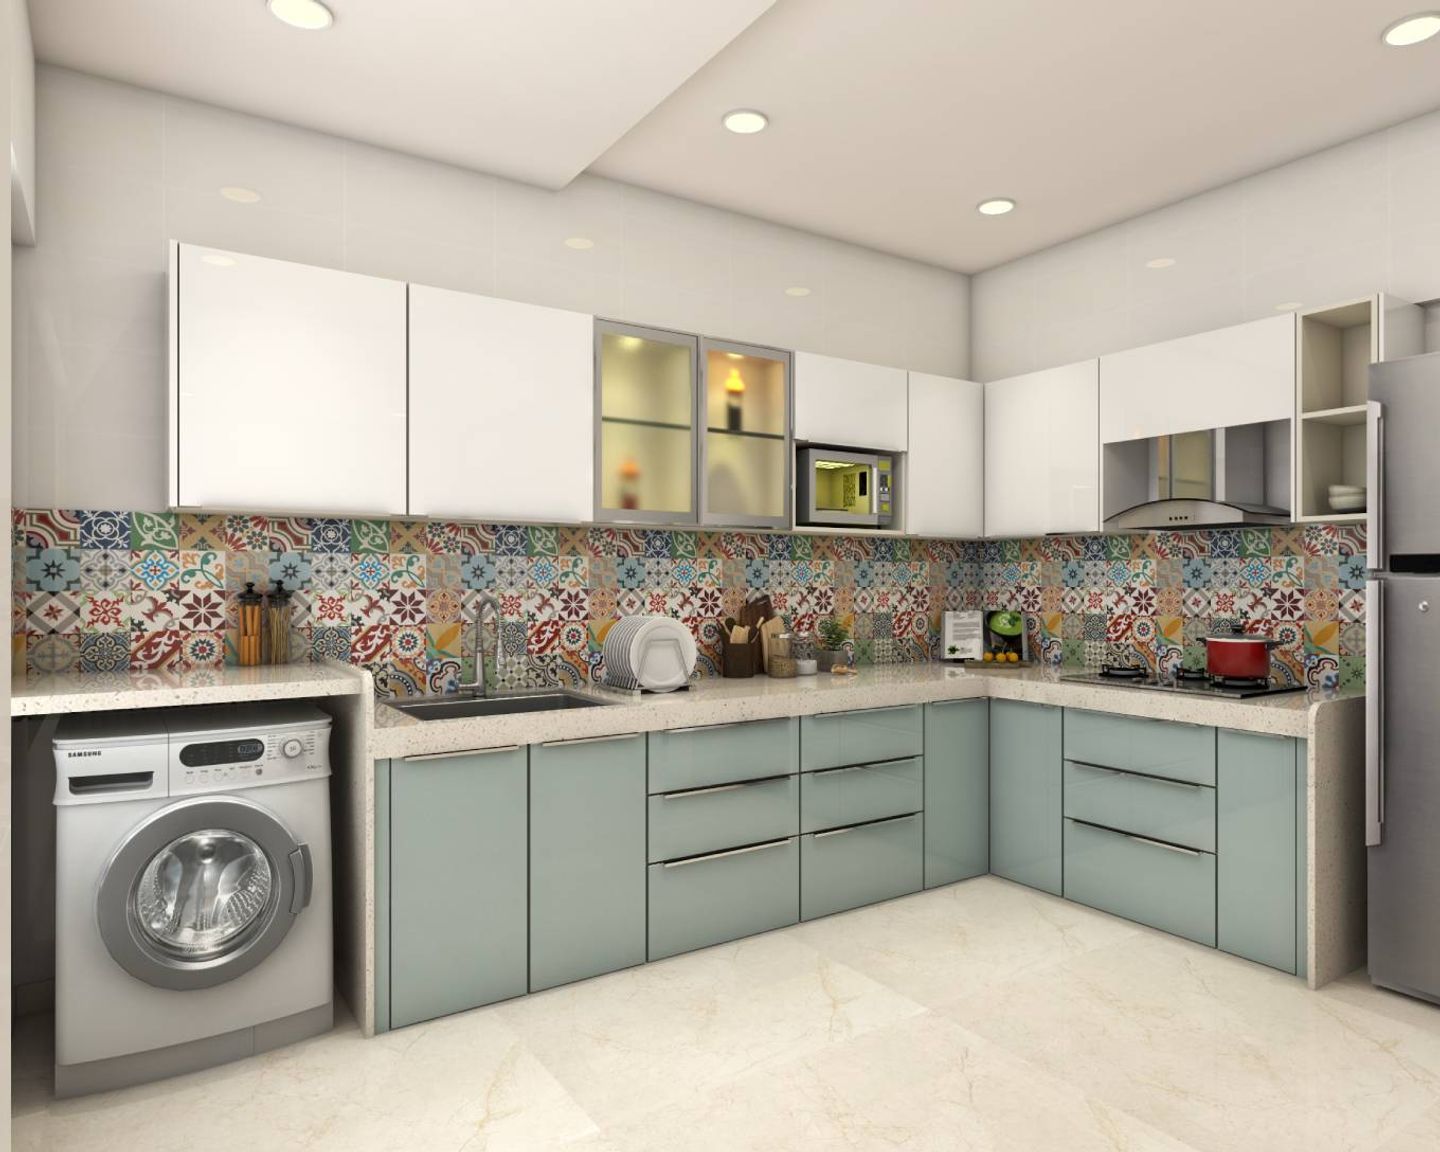 L-Shaped KitchenWith Blue And White Storage Units And Colourful Backsplash Tiles - Livspace